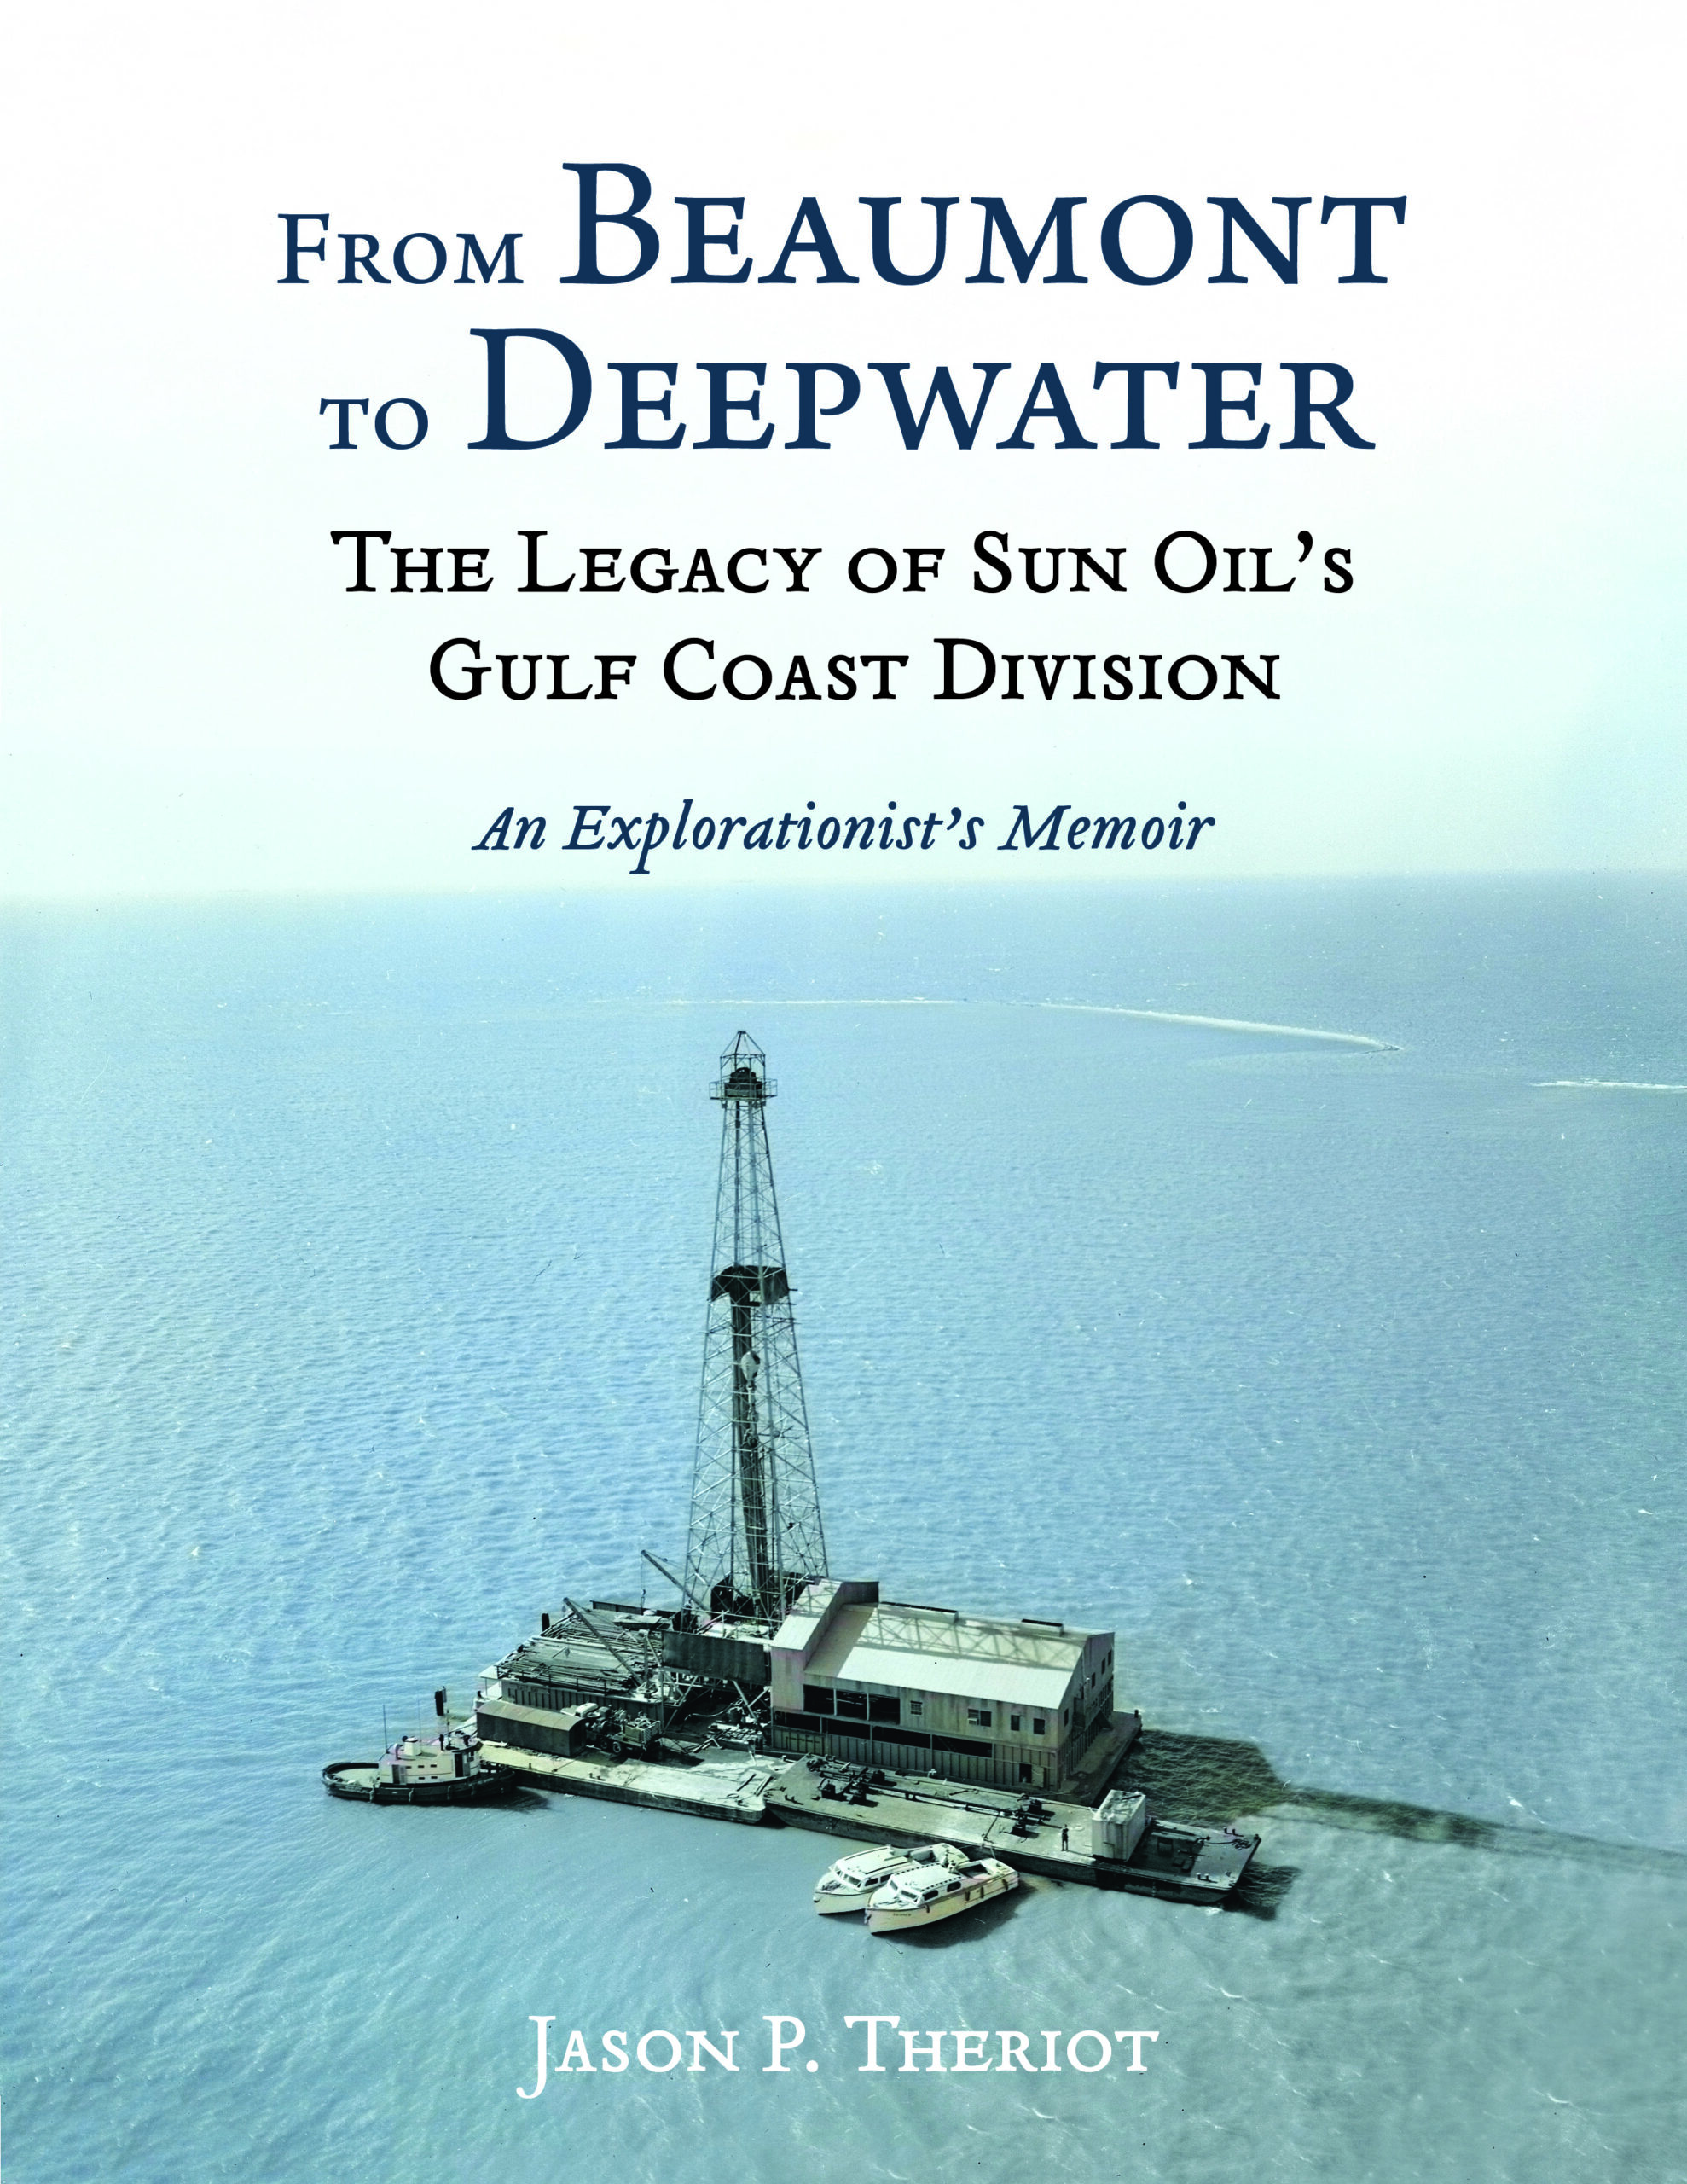 From beaumont to Deepwater cover 10.4